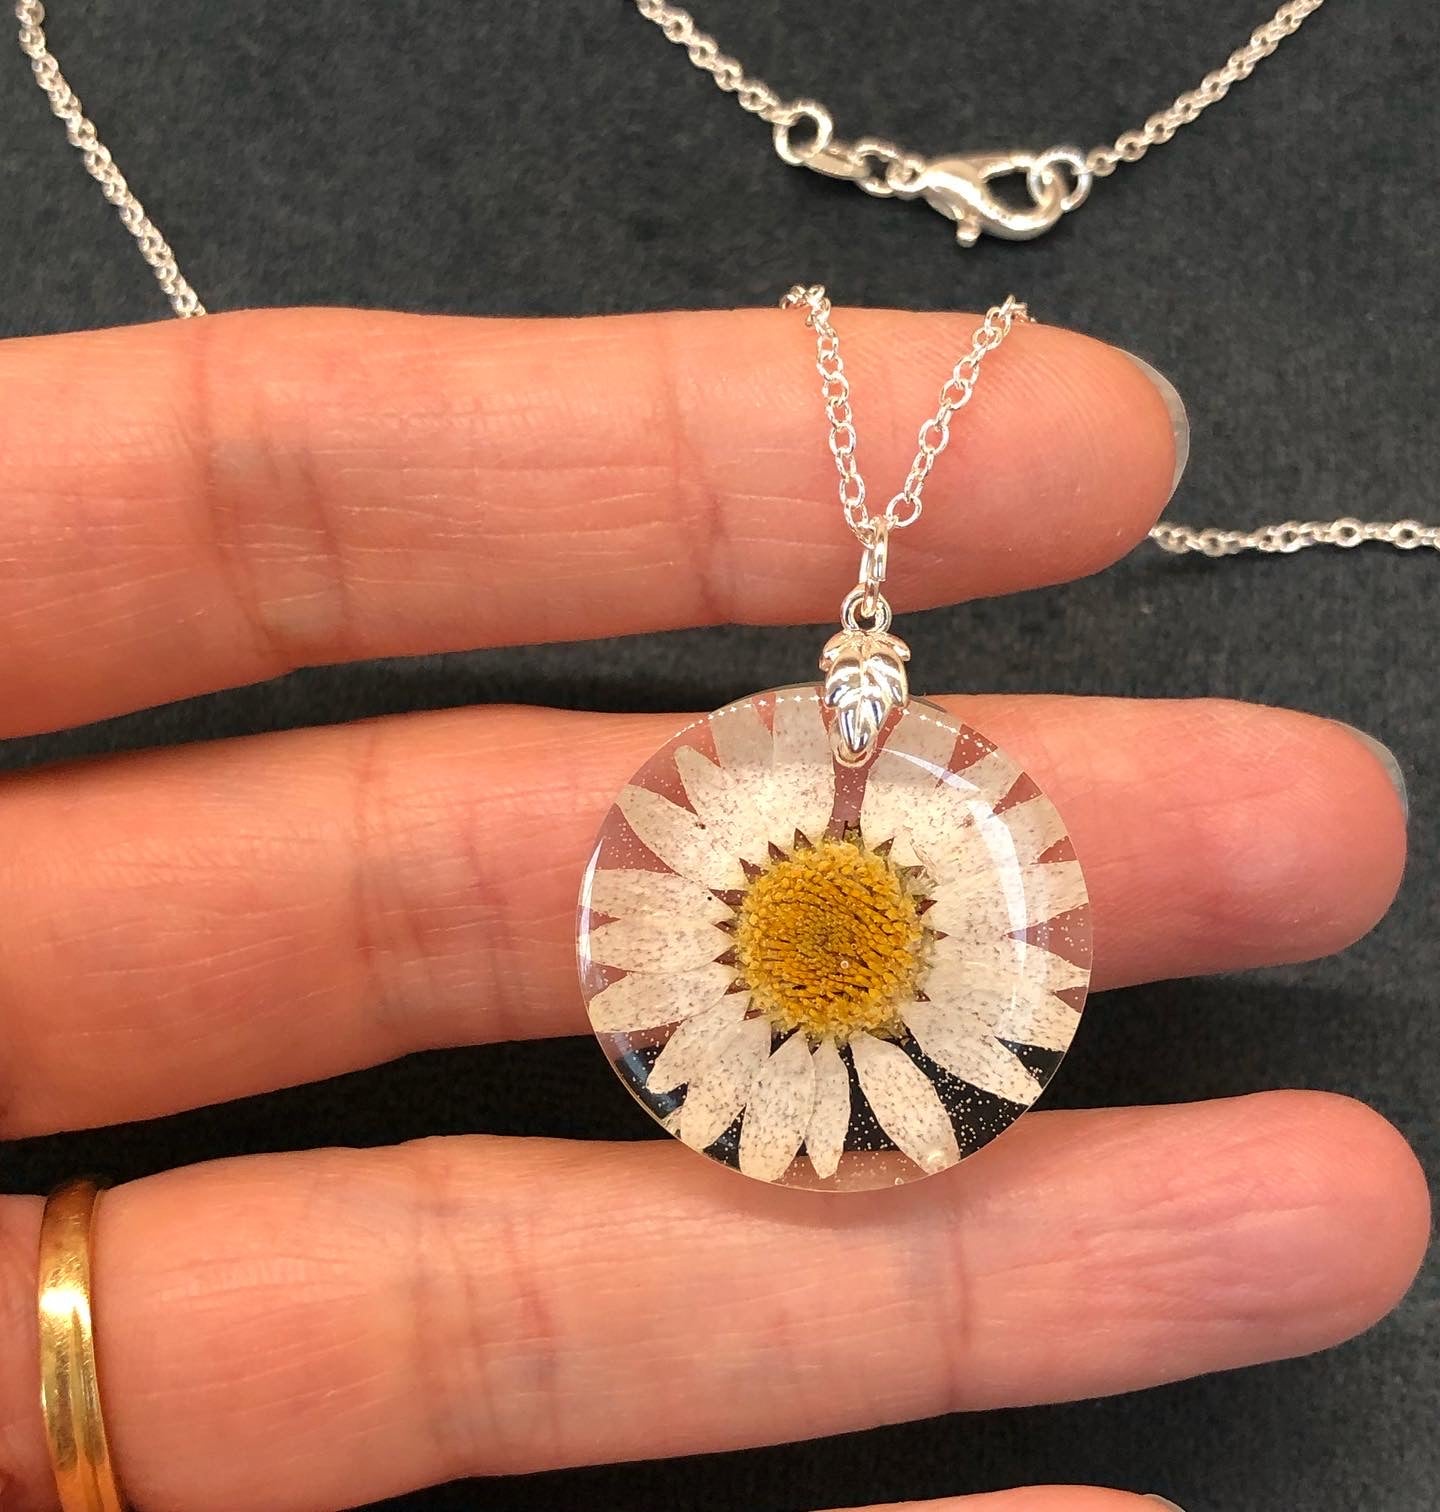 Daisy in epoxy resin necklace on 925 silver plated 18” chain with lobster claw fastener.Handmade  in Grimsby, England, United Kingdom.necklacePadpodandberrieMy Fairytale Gifts925 silver plated 18” chain